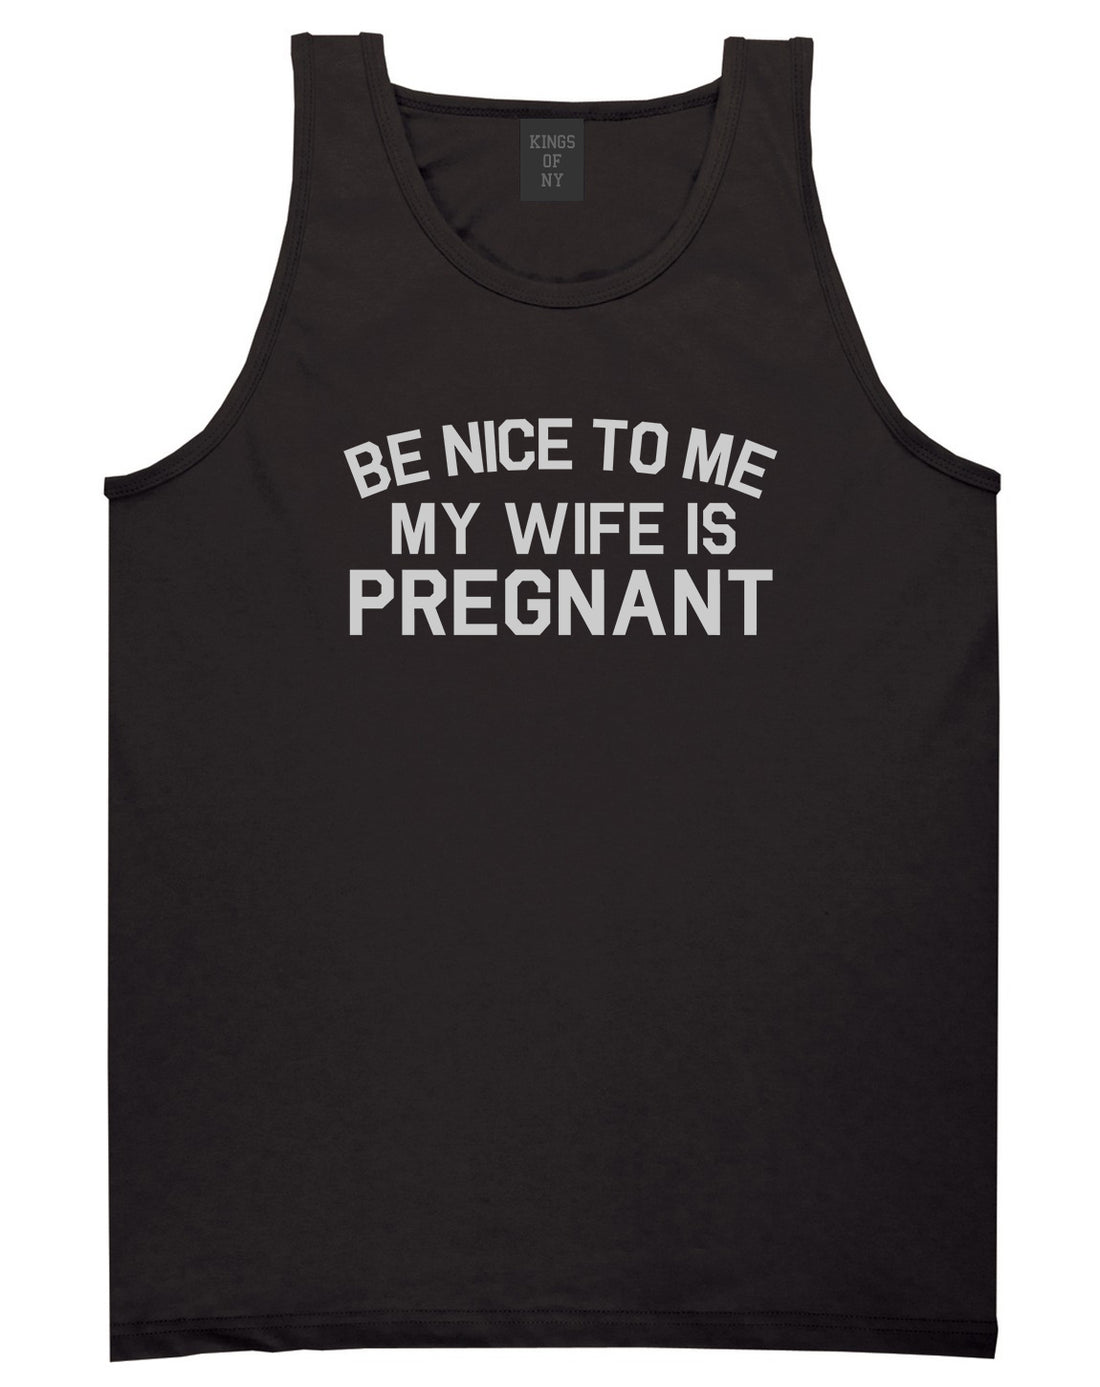 Be Nice To Me My Wife Is Pregnant Mens Tank Top Shirt Black